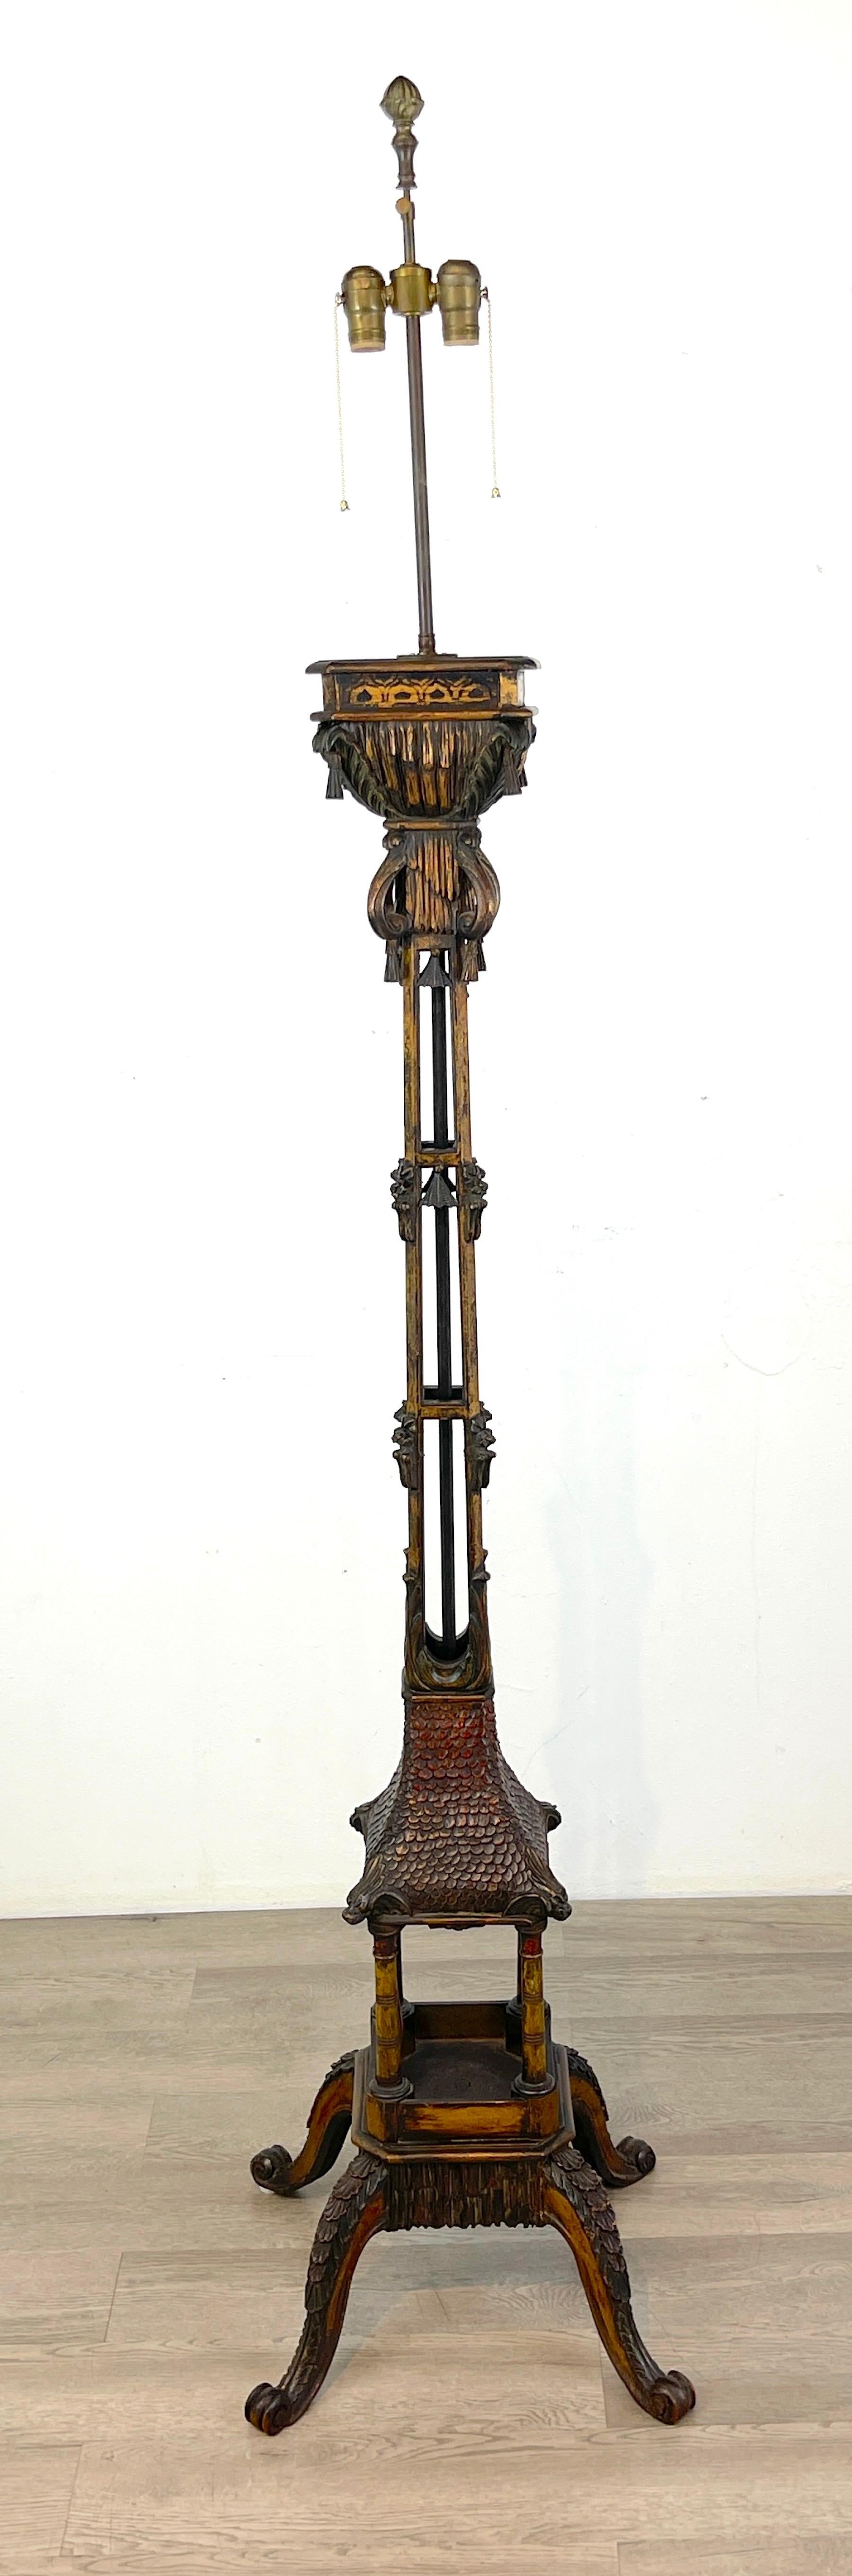 Carved & polychromed wood Chinoiserie pagoda motif floor lamp
England, Circa 1900s
An extraordinary carved and polychromed substantial chinoiserie pagoda floor lamp, standing 64-Inches high to the top of the column, 84 total inches high ( the